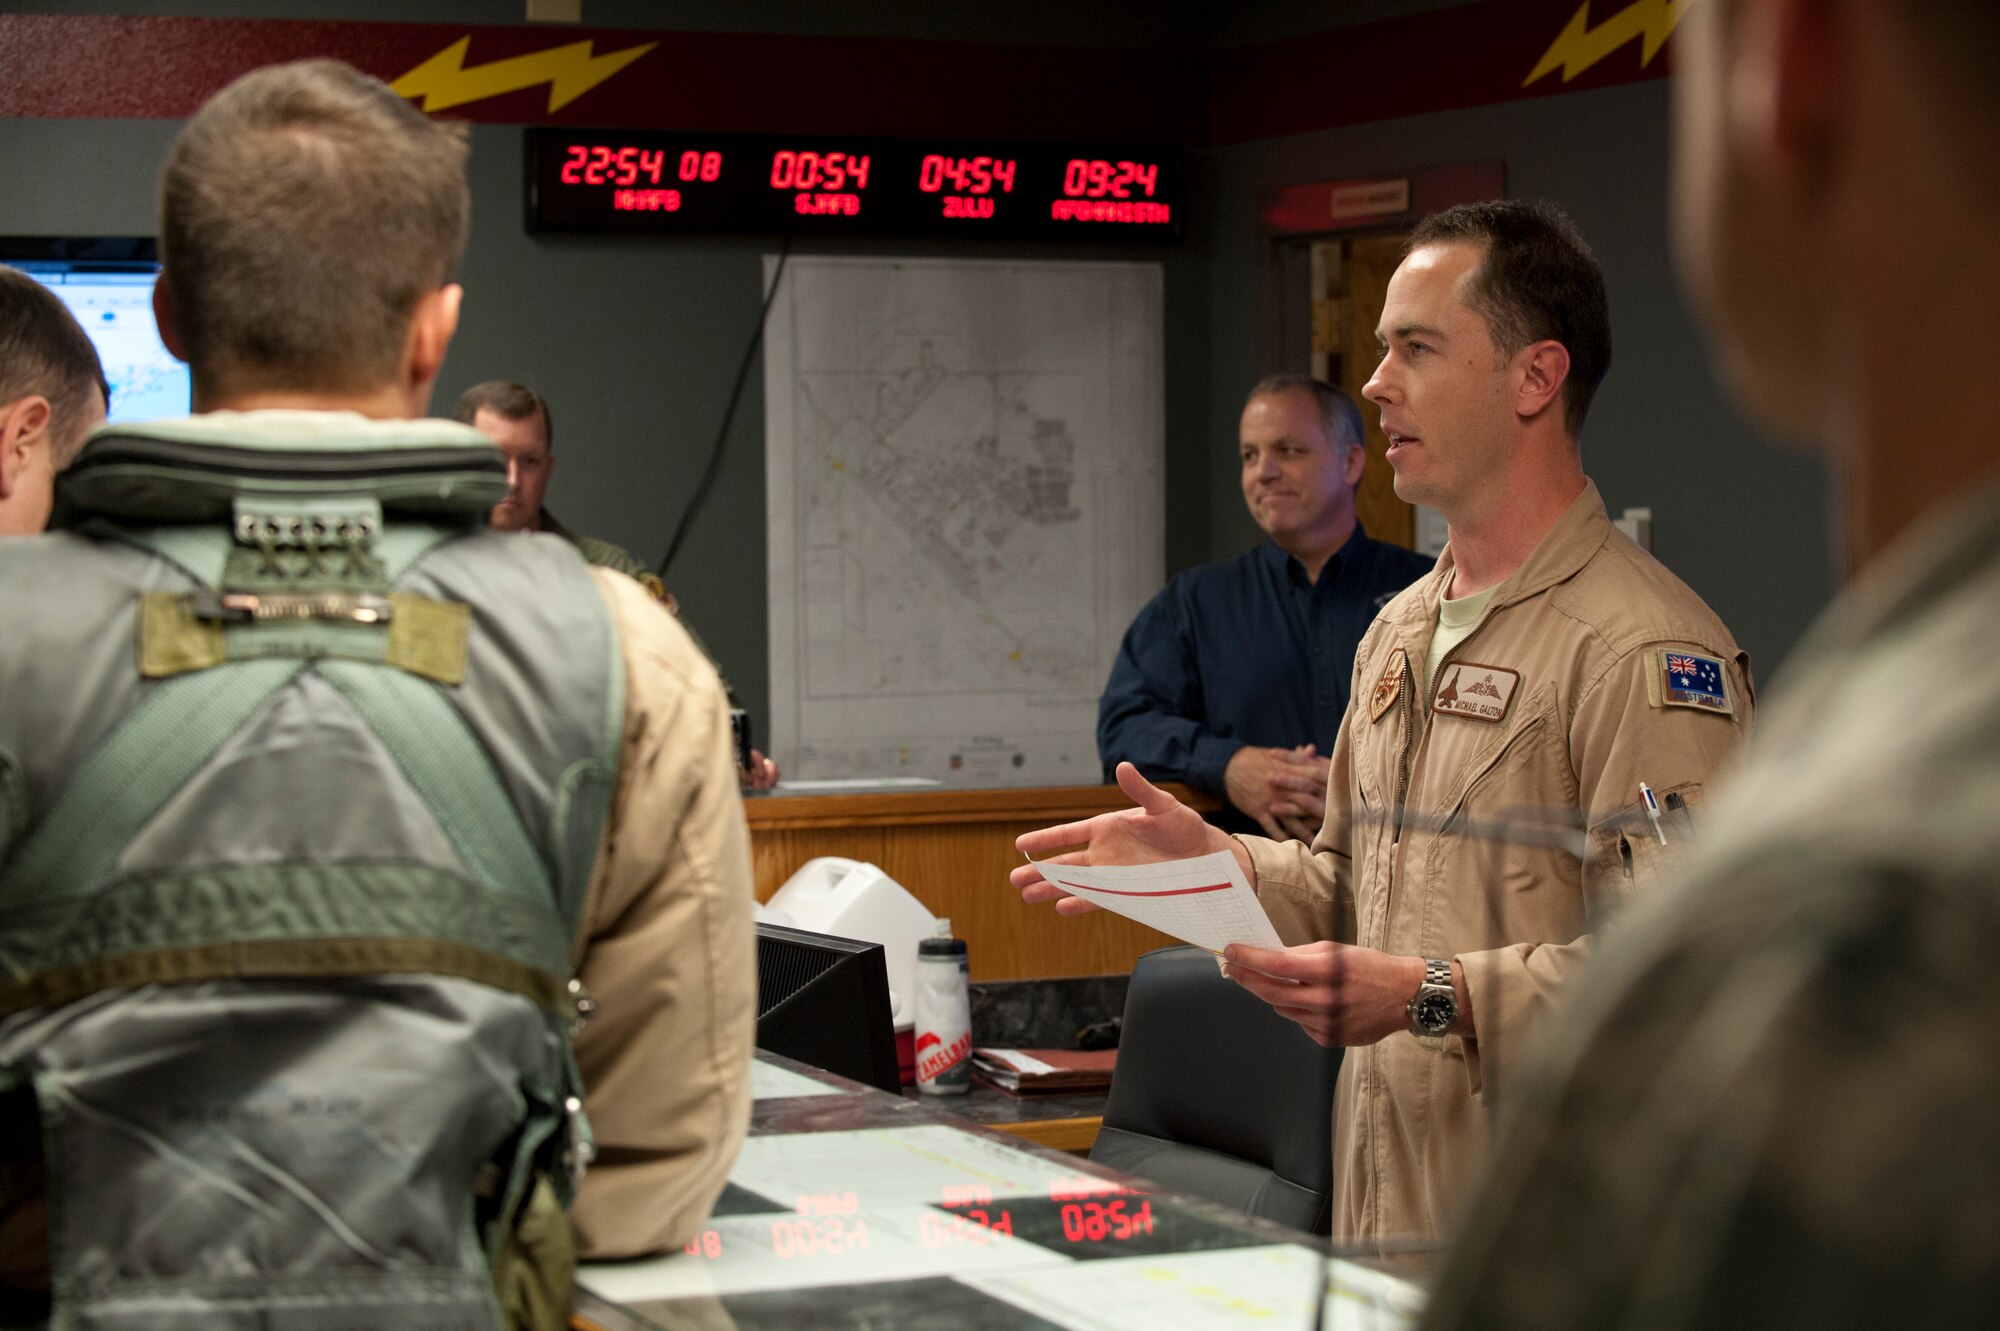 Royal Australian Air Force Flight Lt. Michael Galton, 389th Fighter Squadron assistant director of operations, briefs deploying aircrew at the 389th FS operations desk at Mountain Home Air Force Base, Idaho, April 21, 2013. The deploying Airmen will support combat operations in Southwest Asia with F-15E Strike Eagles. (U.S. Air Force photo/Staff Sgt. Roy Lynch) (Released)